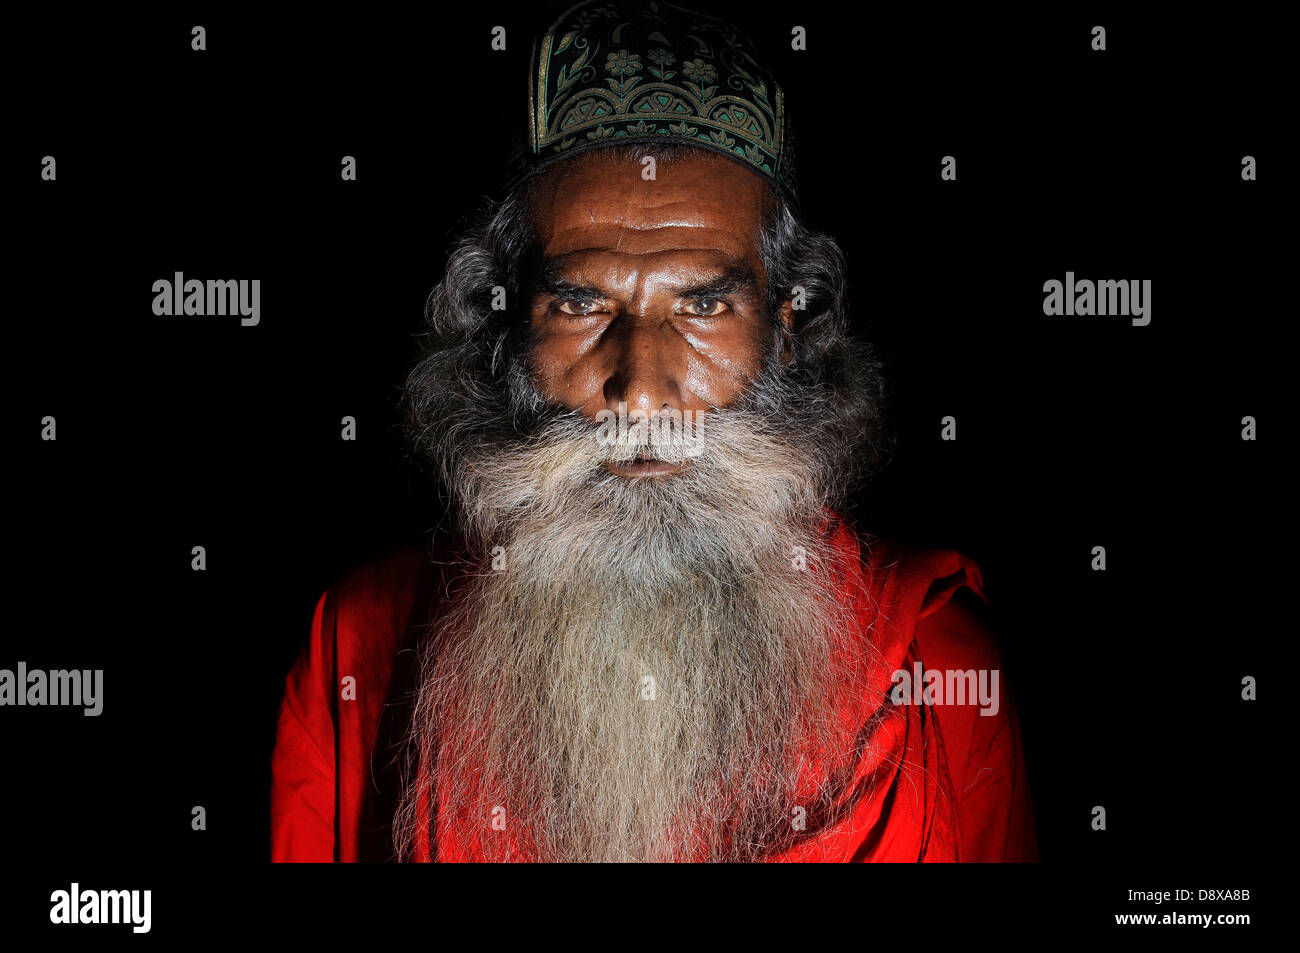 Sufi fakirs (mystics and holy men) in India Stock Photo